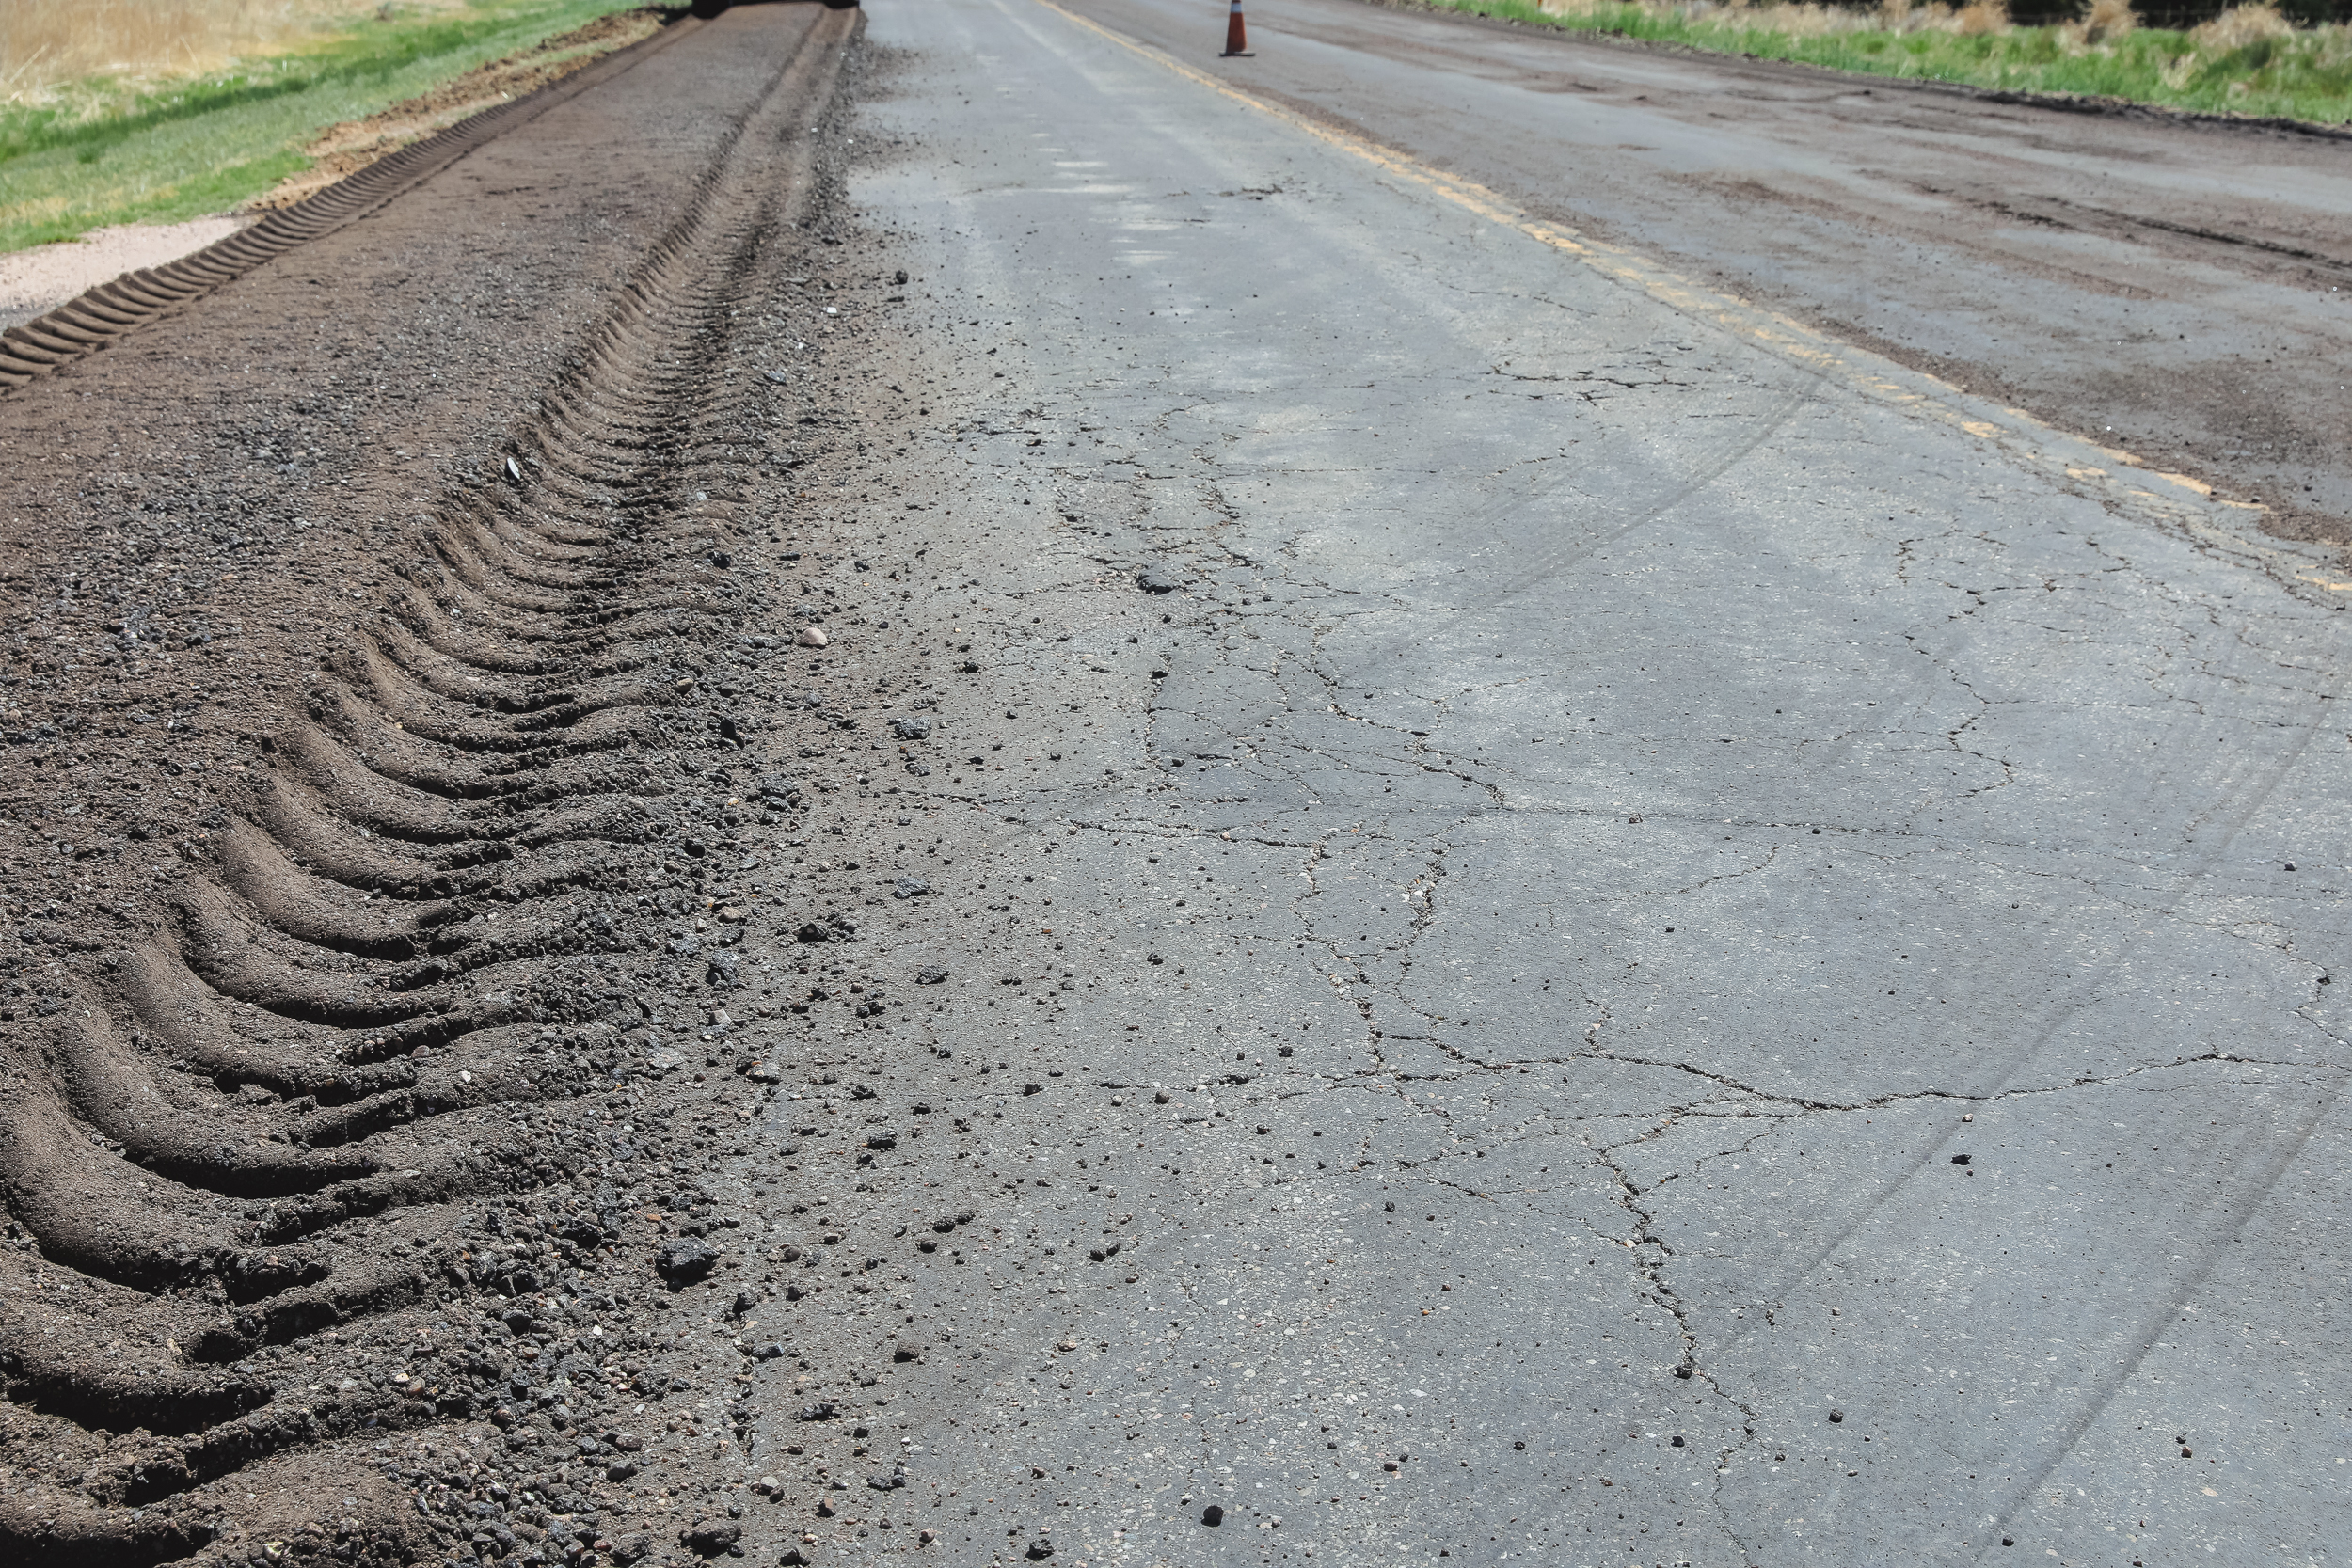 closeup damaged pavement slated for reclamation and resurfacing CO 14 (1).jpg detail image